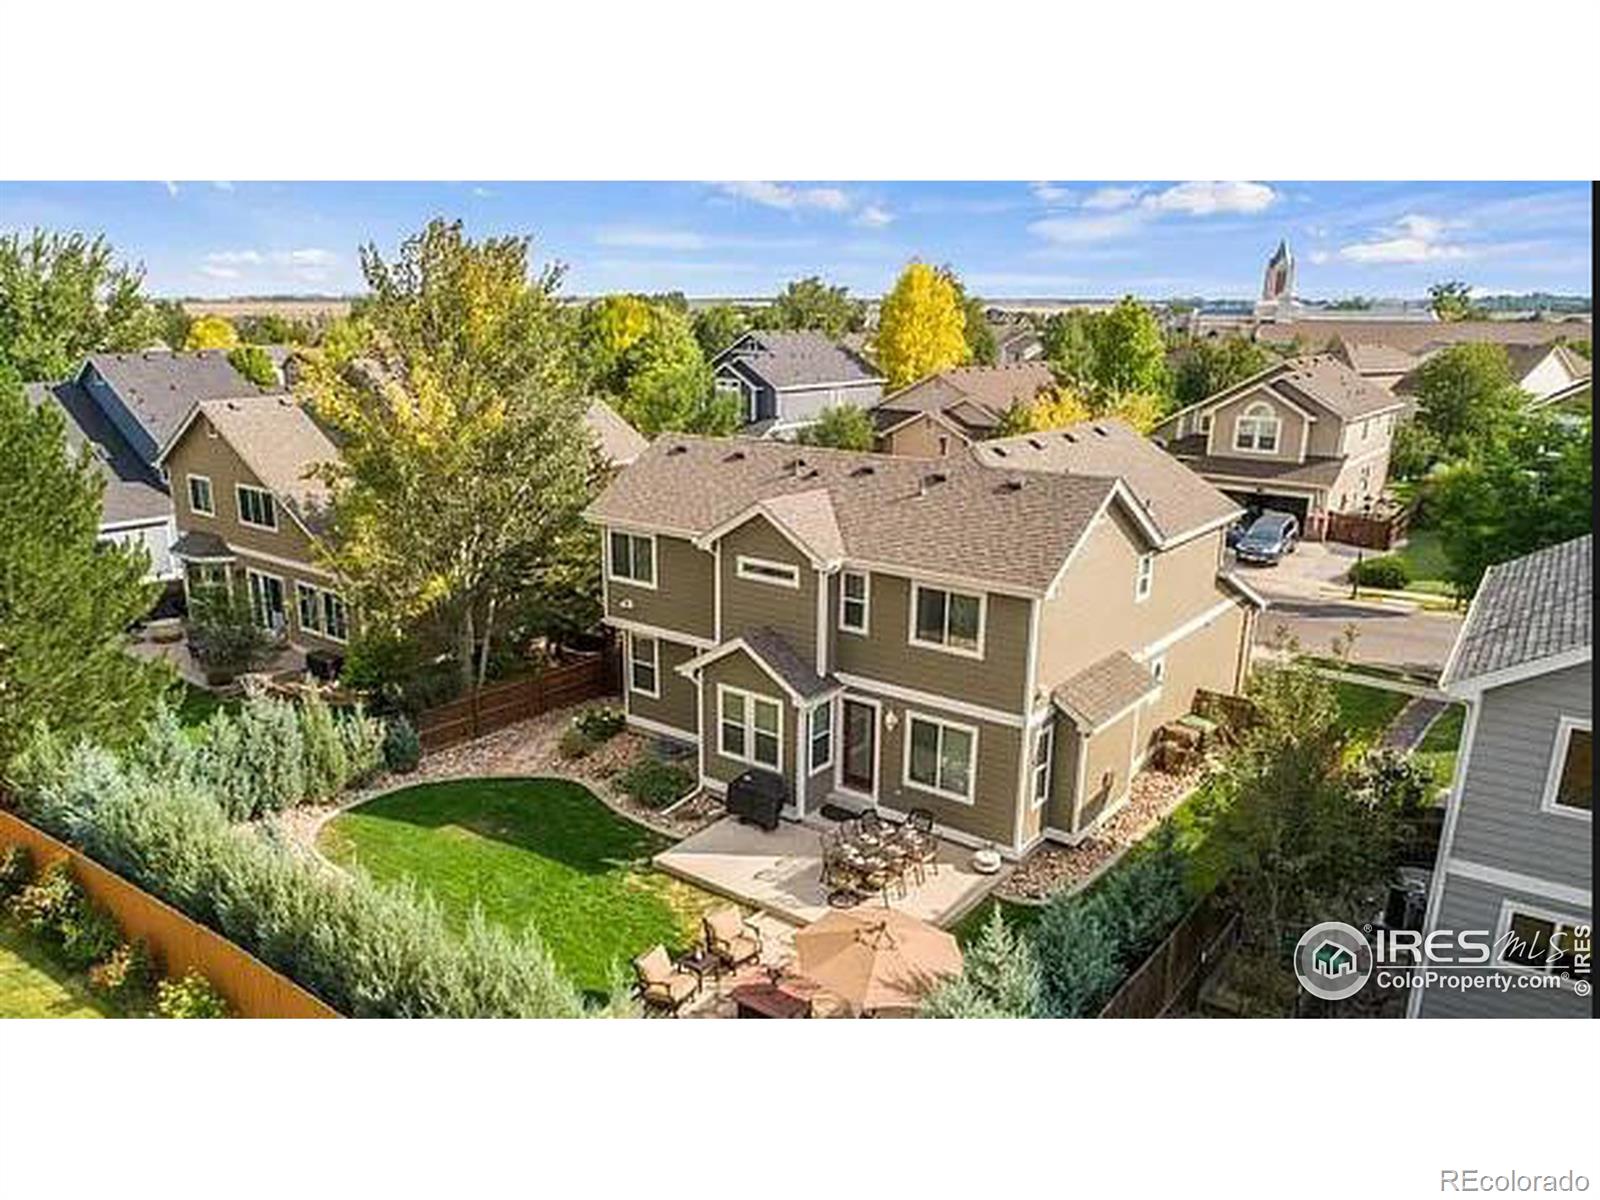 Report Image for 2208  Westchase Road,Fort Collins, Colorado